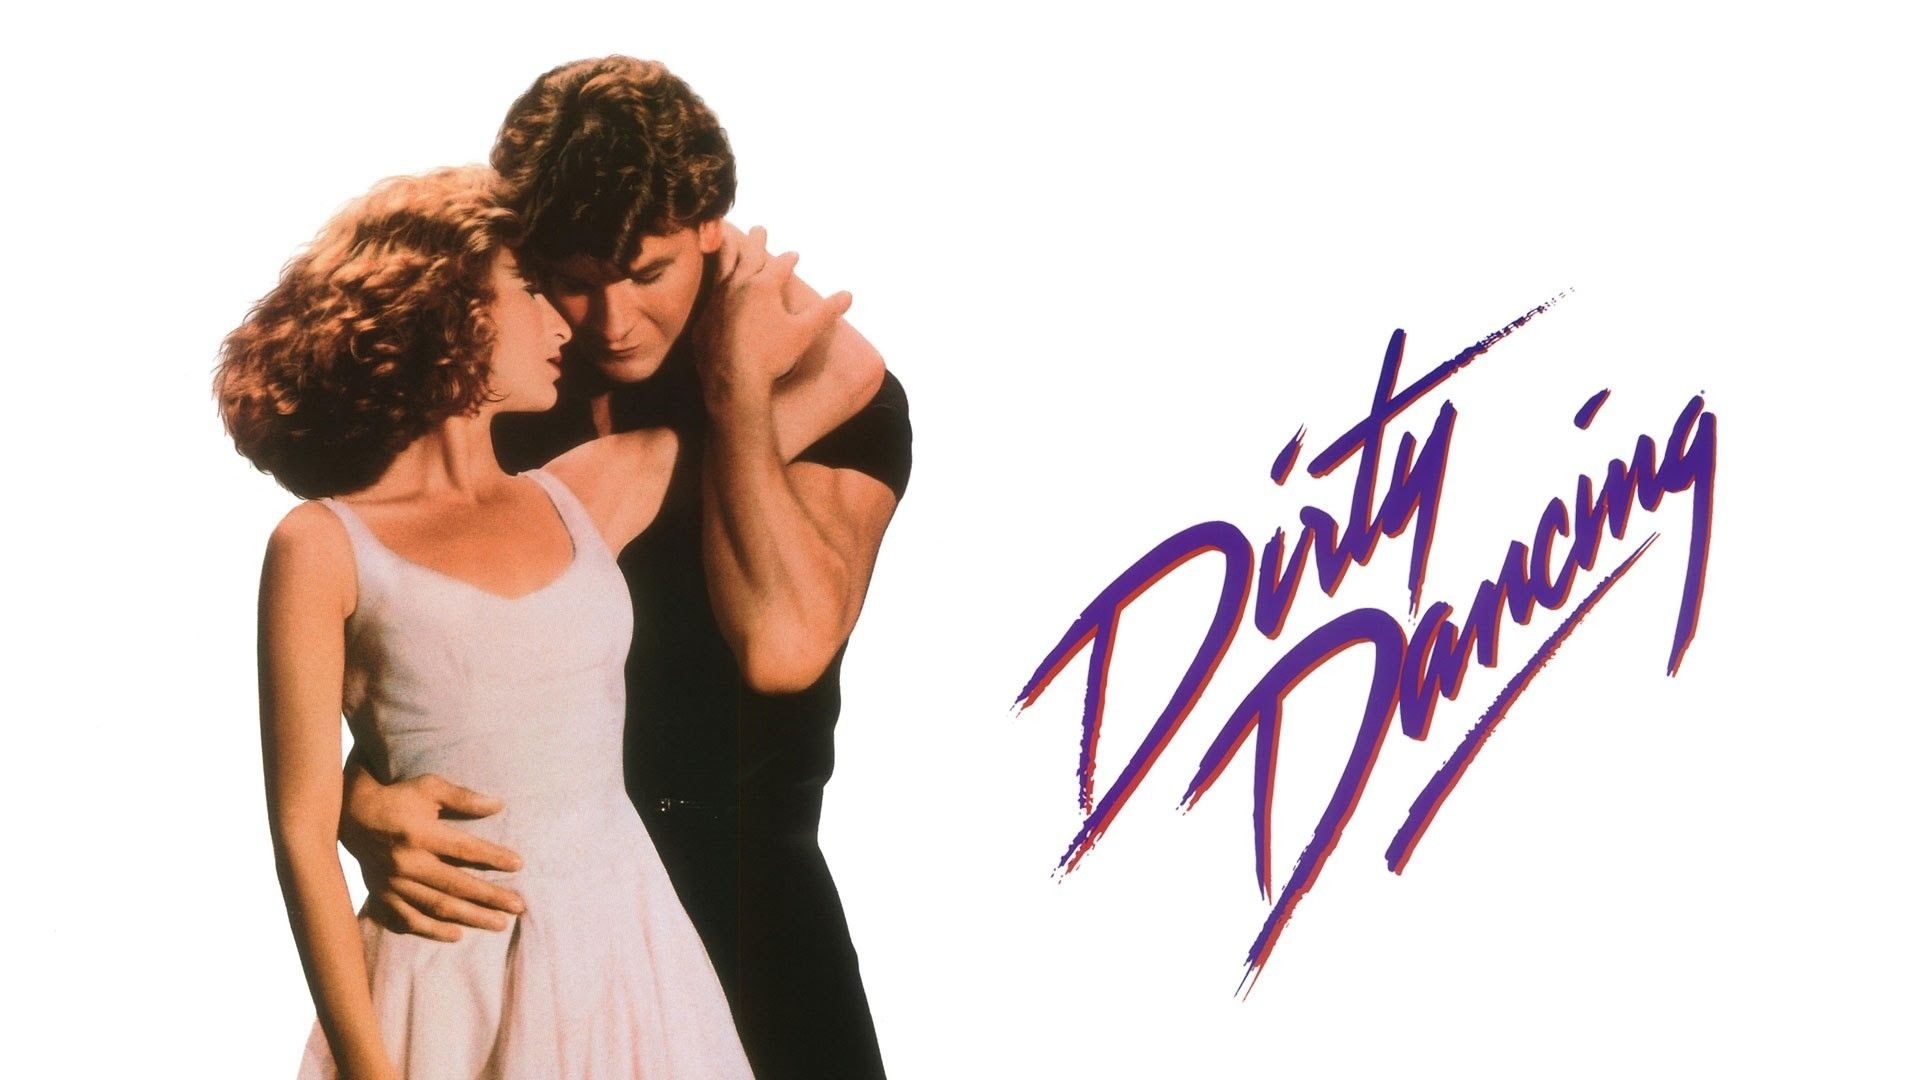 Dirty Dancing movies, Mesmerizing wallpapers, Passionate dance moves, Dance enthusiasts, 1920x1080 Full HD Desktop